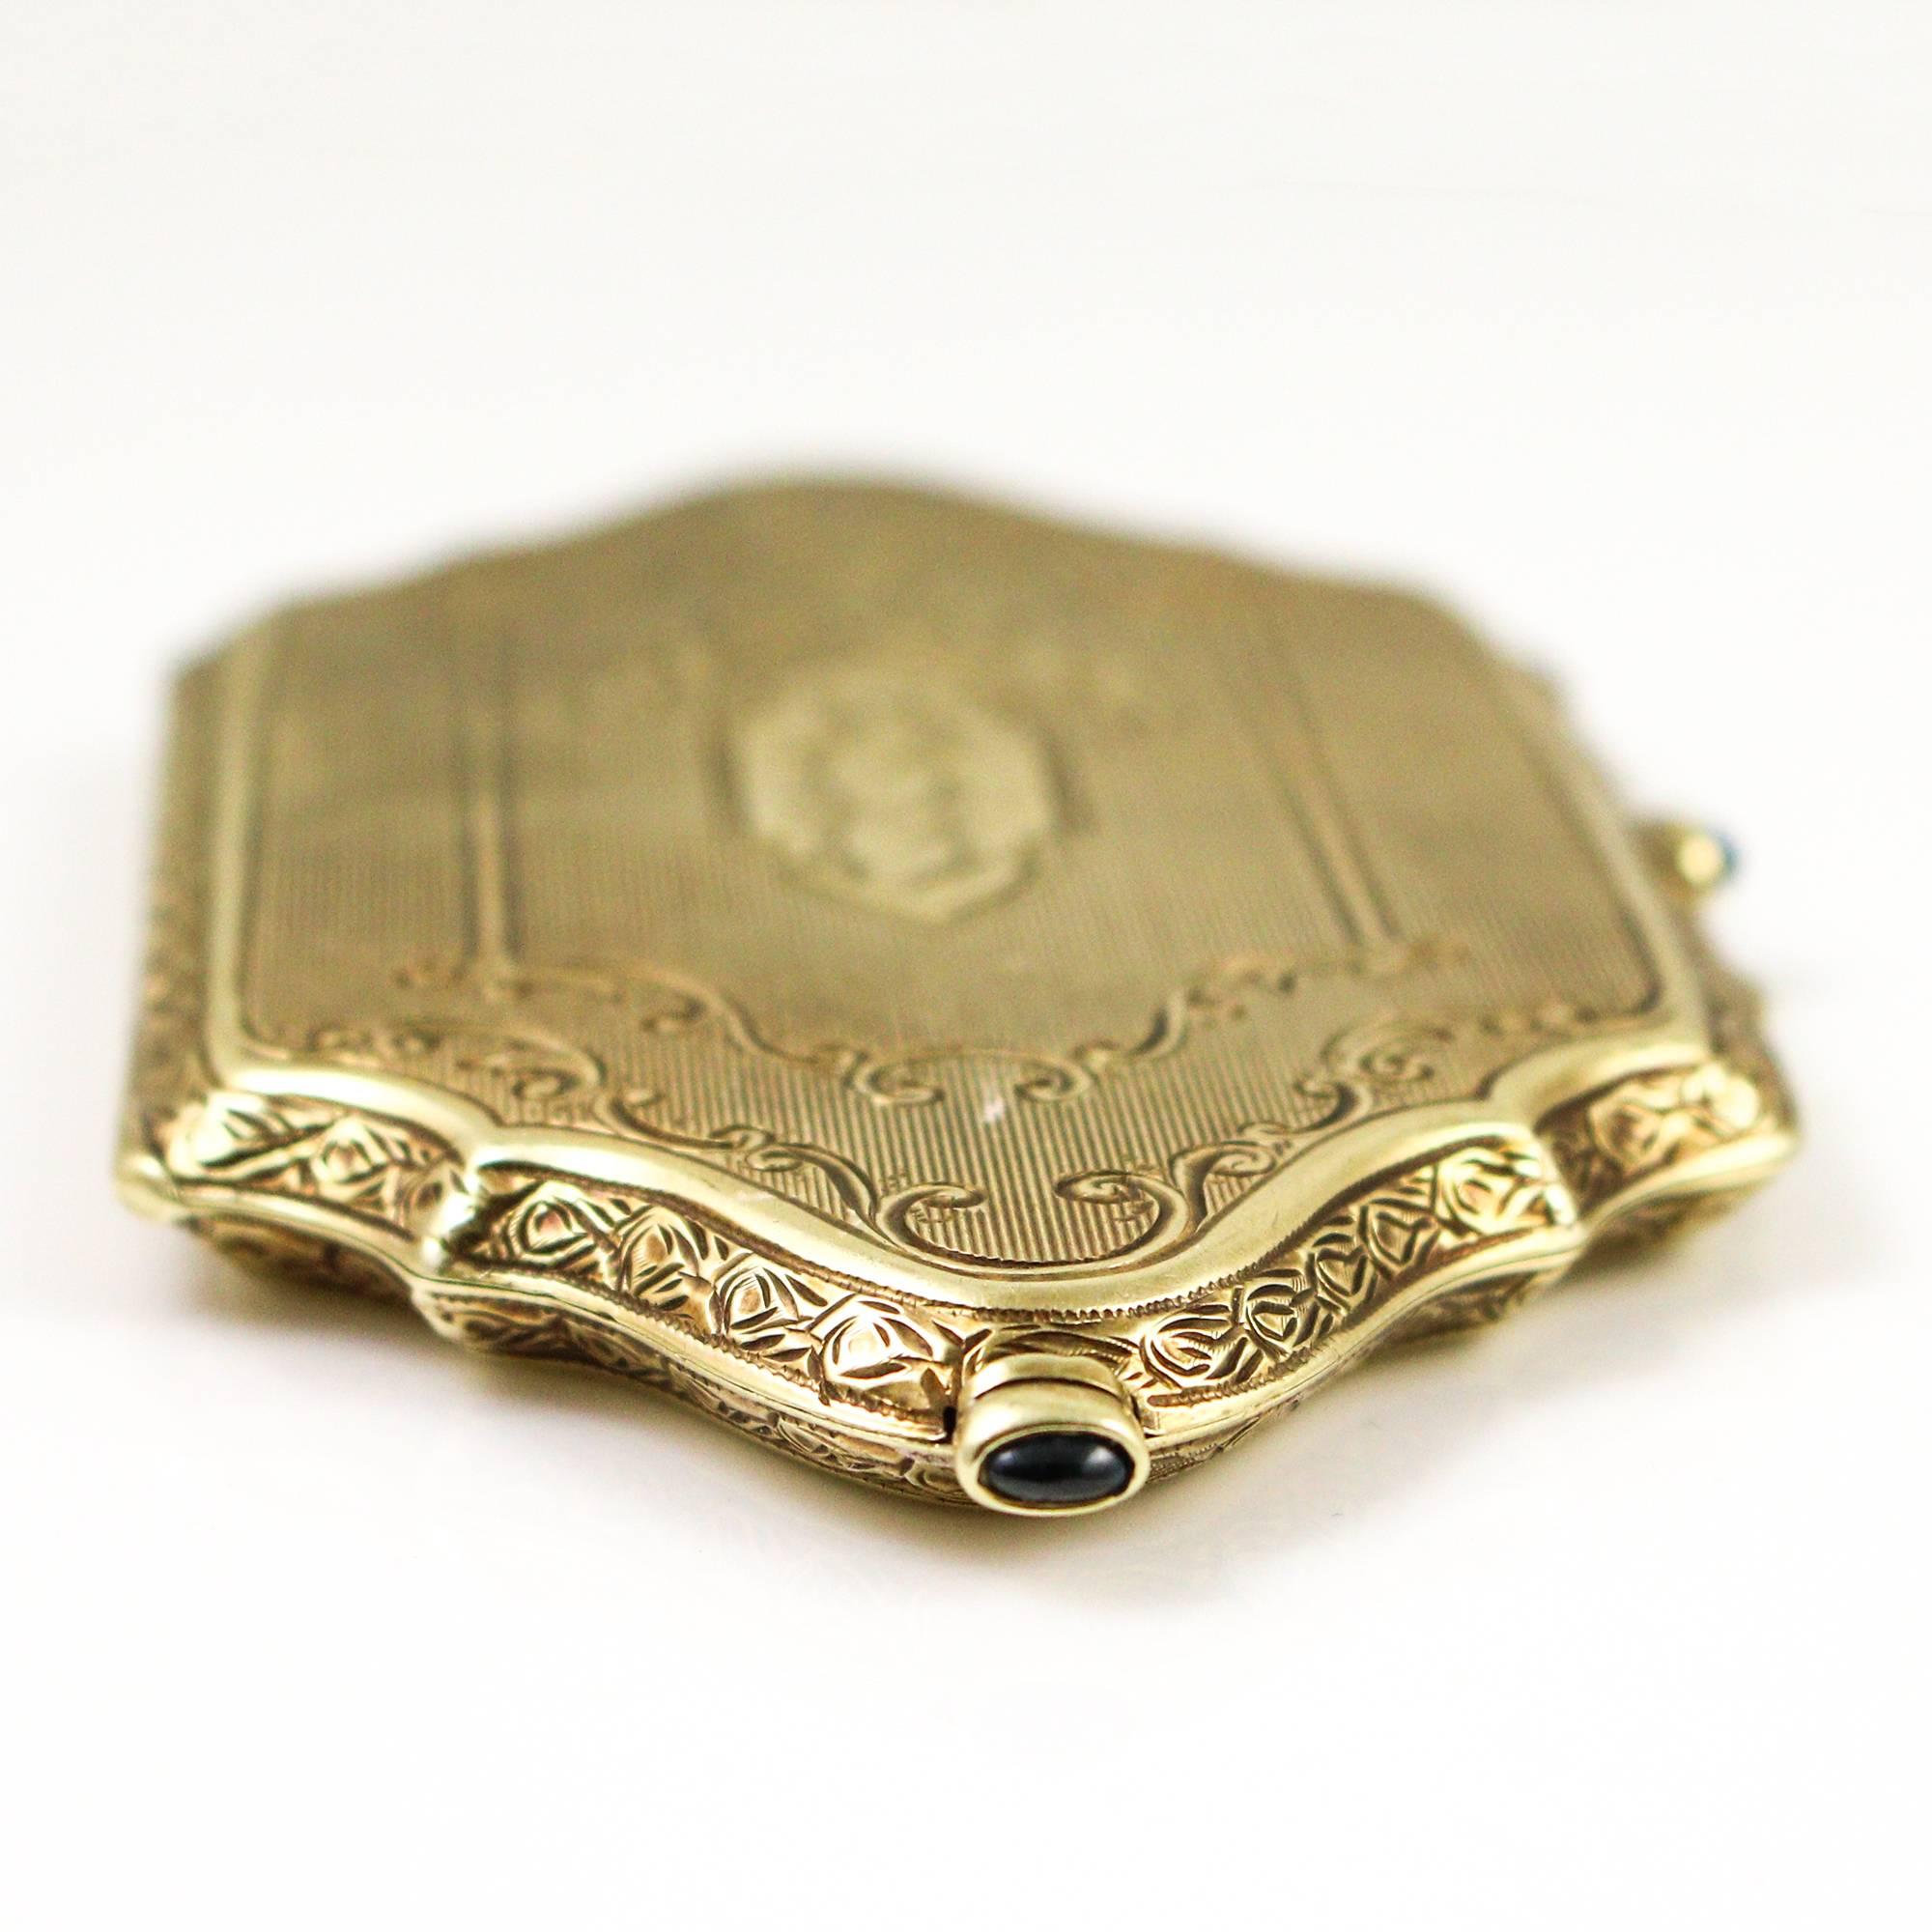 Retro Exquisite Gold Engraved Compact With Sapphire Accents